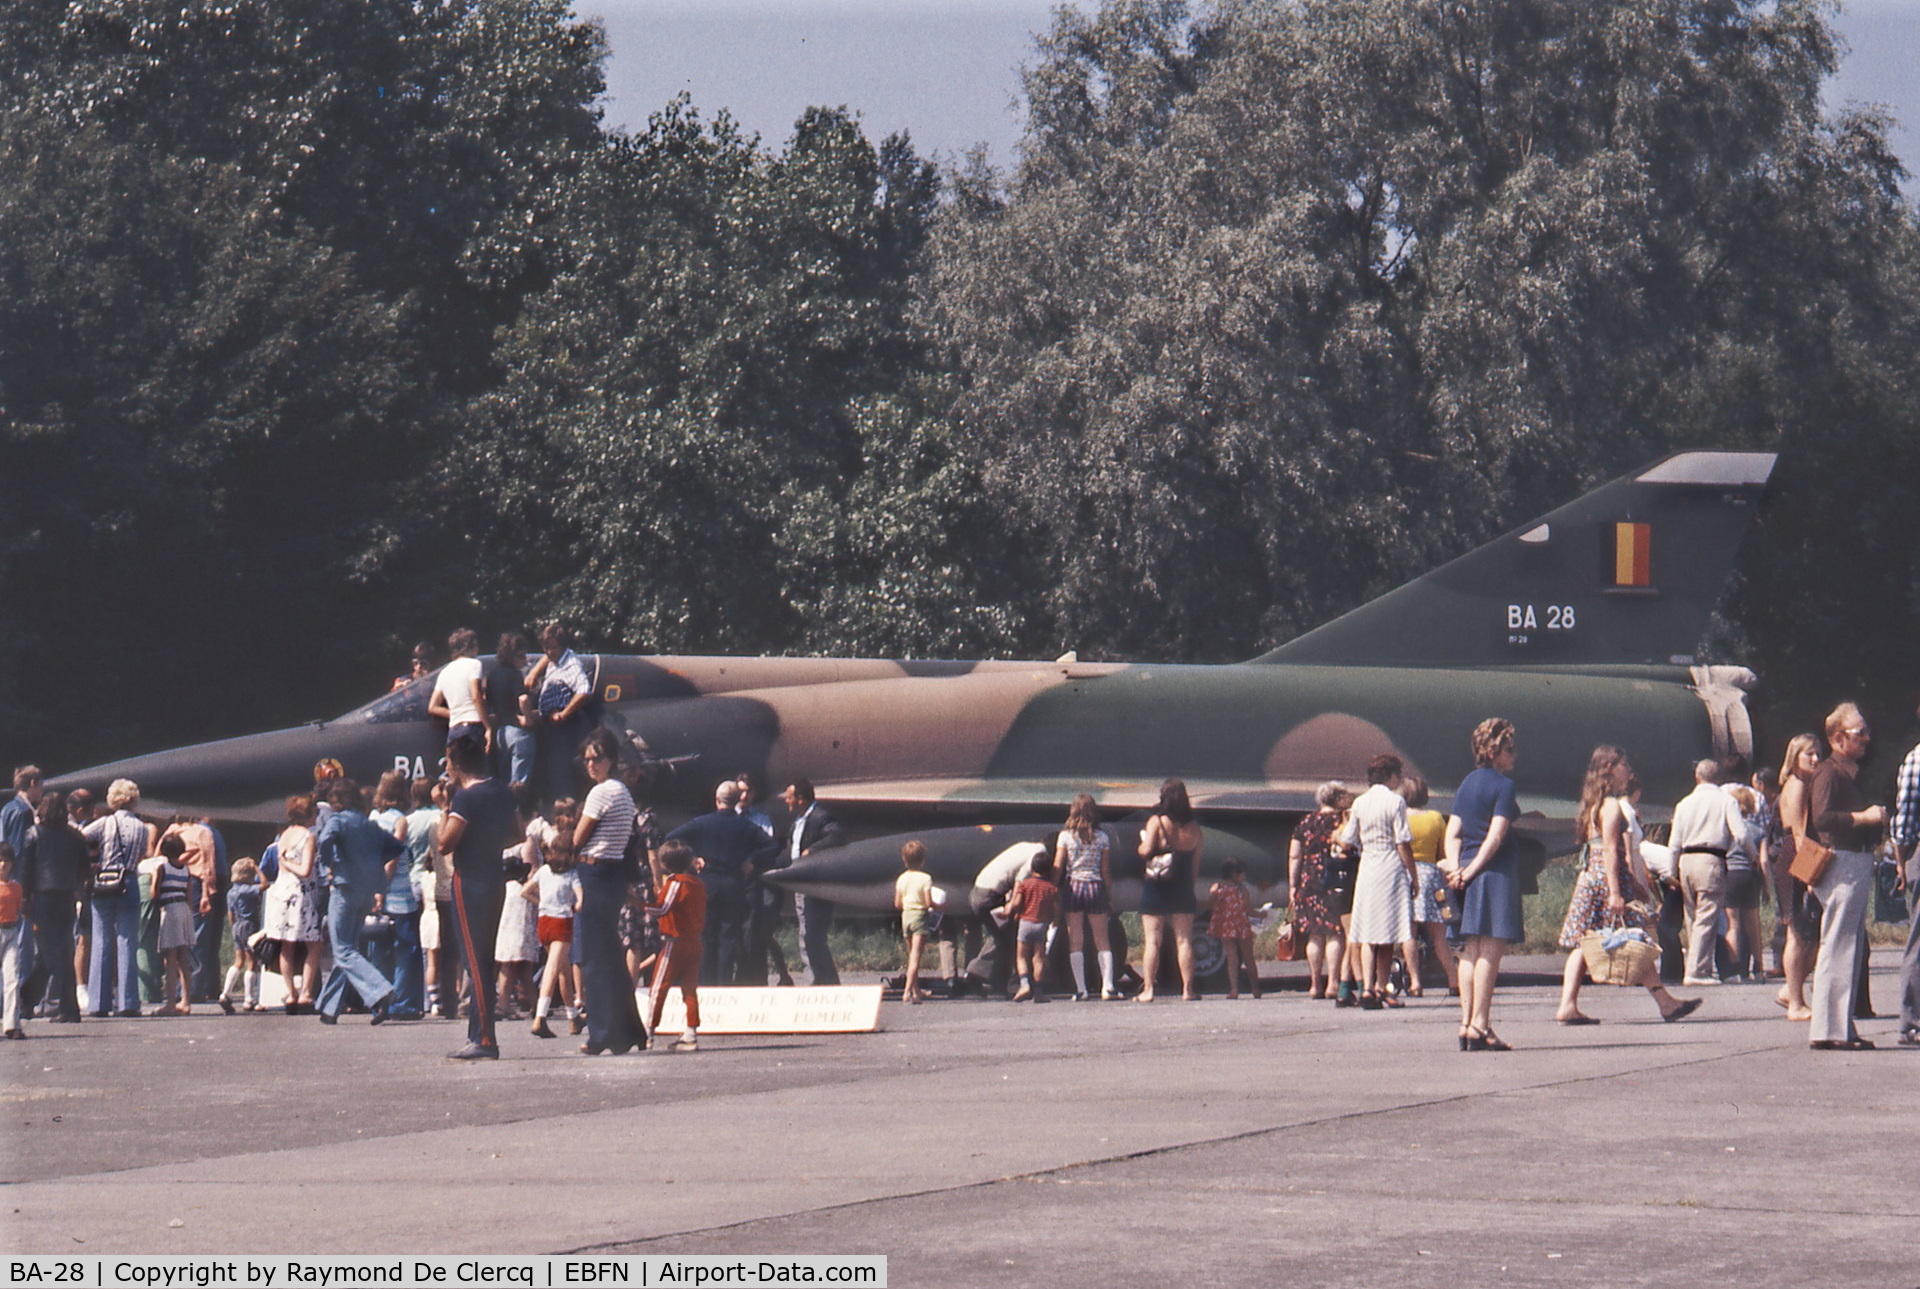 BA-28, 1971 Dassault Mirage 5BA C/N 28, Static display at Koksijde AB on an open day around 1975.
BA-28 crashed at Schleiden (Germany) on 1979-05-16 due to an engine failure.